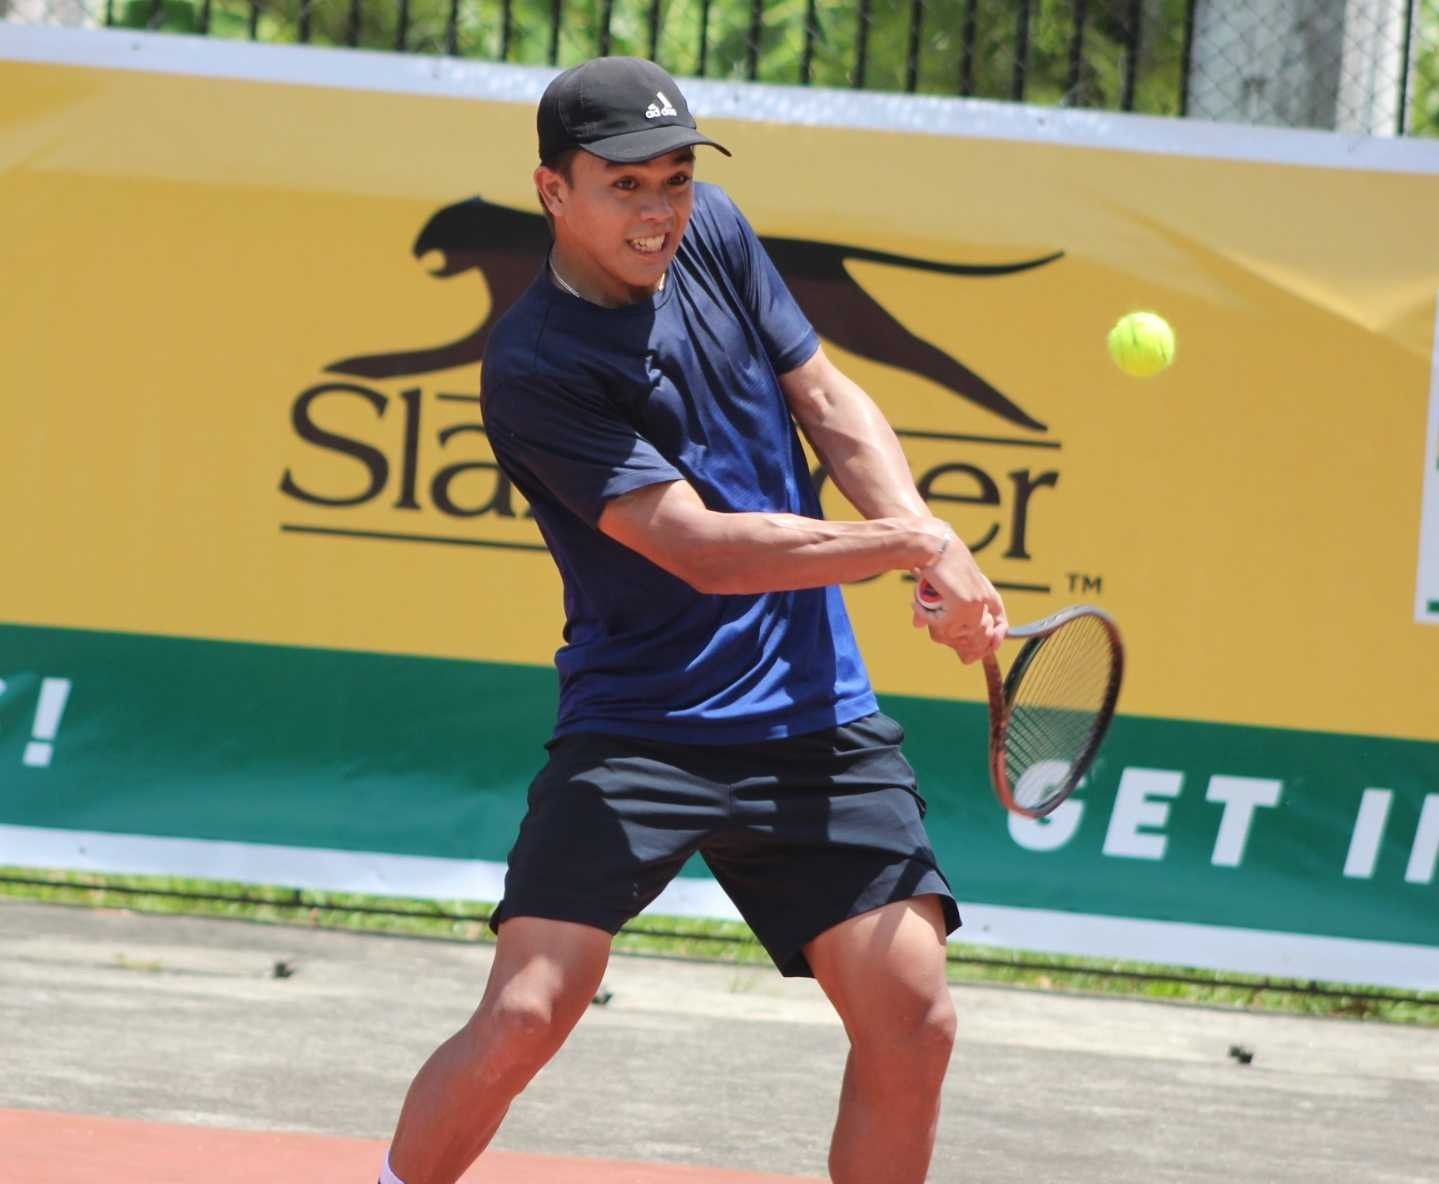 Olivarez seeks another tennis win at home court